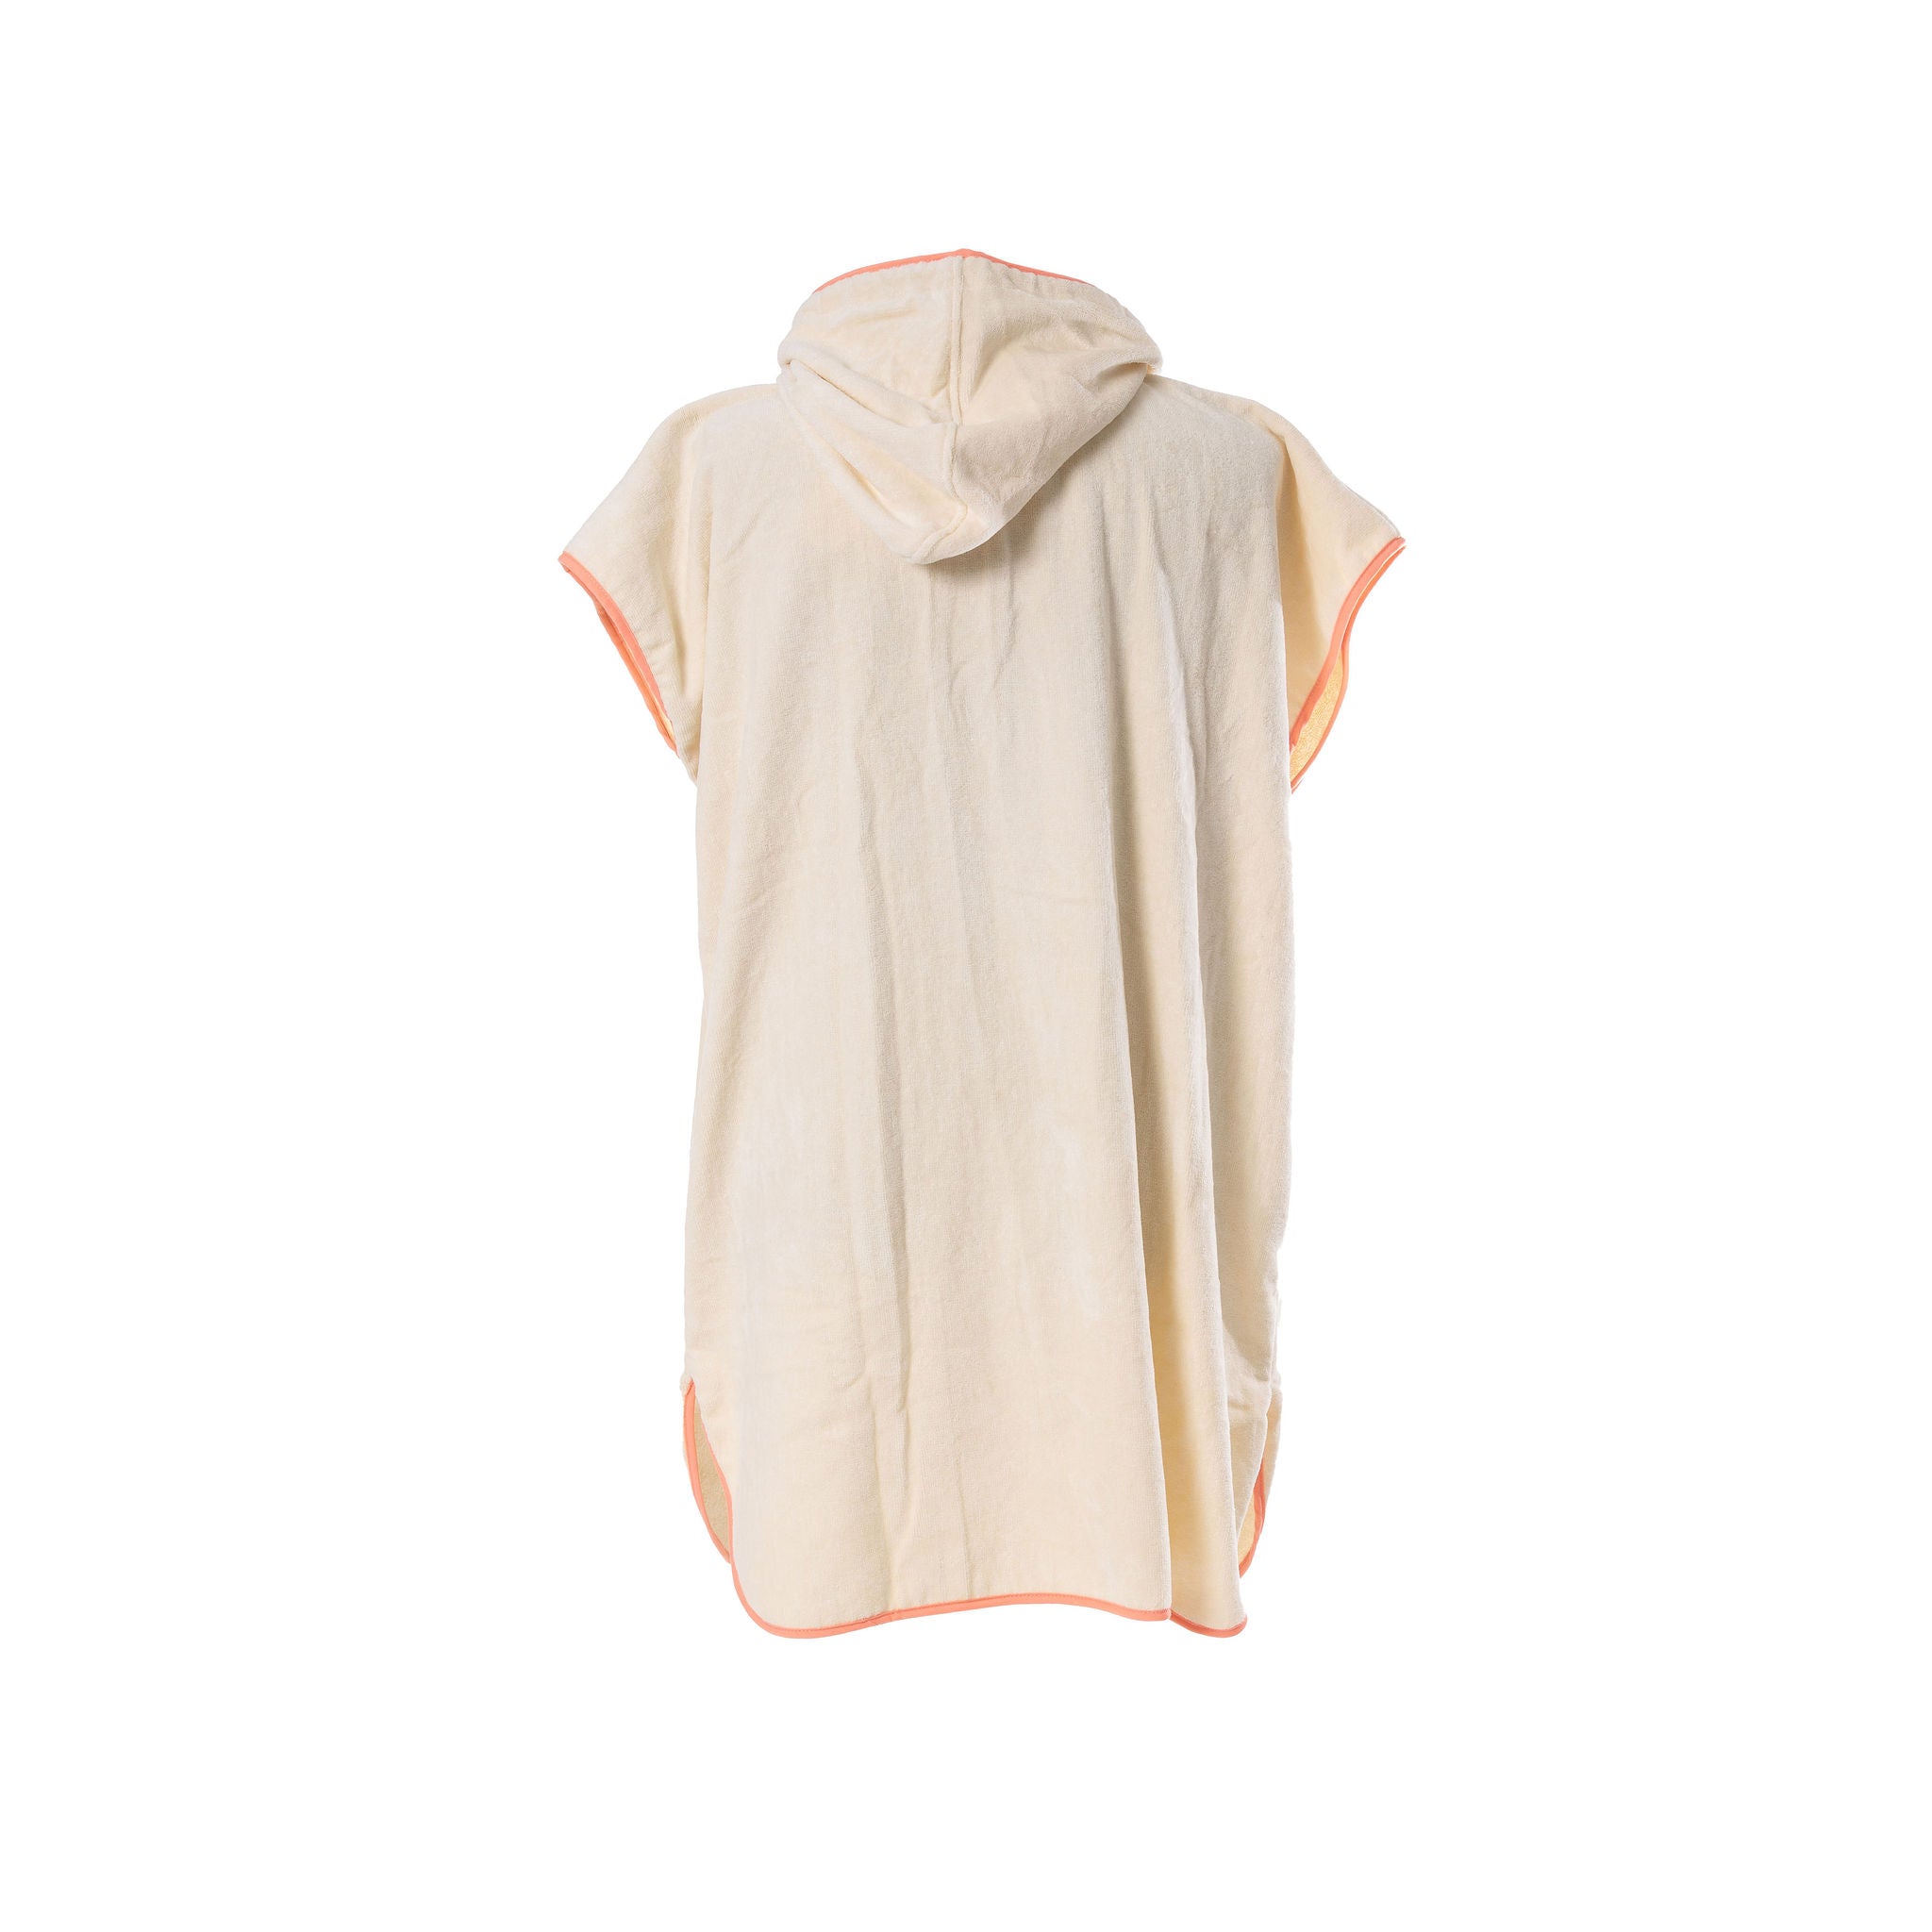 PONCHO TOALLA MUJER WHY NOT COD.1507